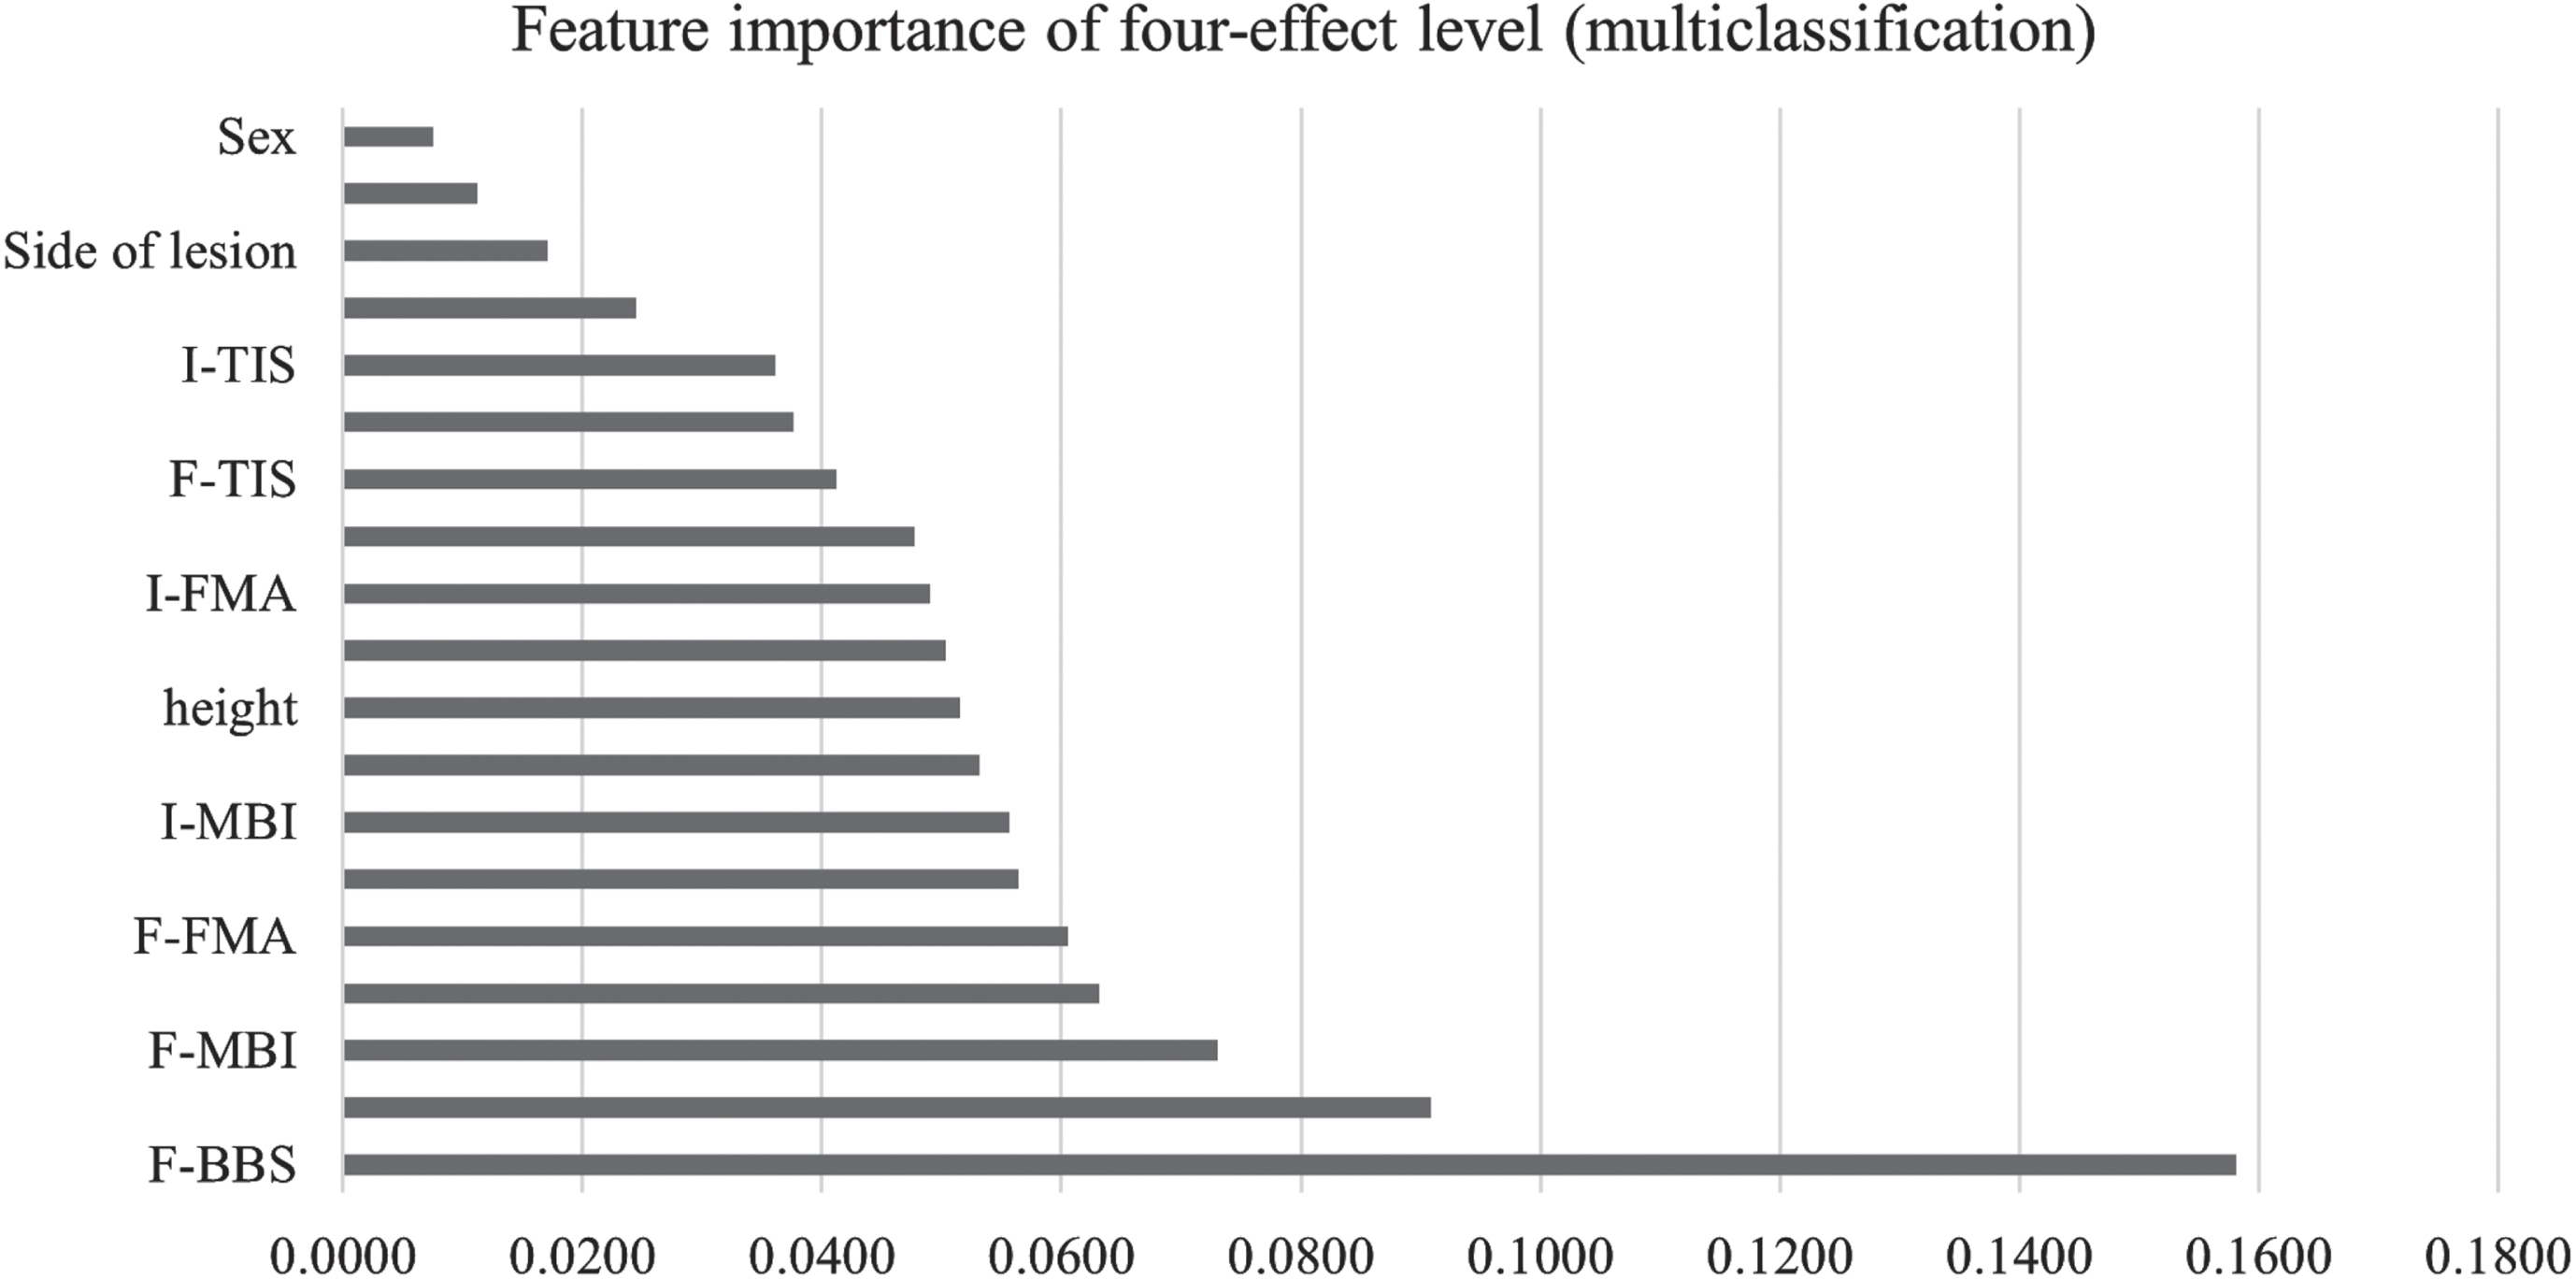 Feature importance of four-effect level (multiclassiffication).